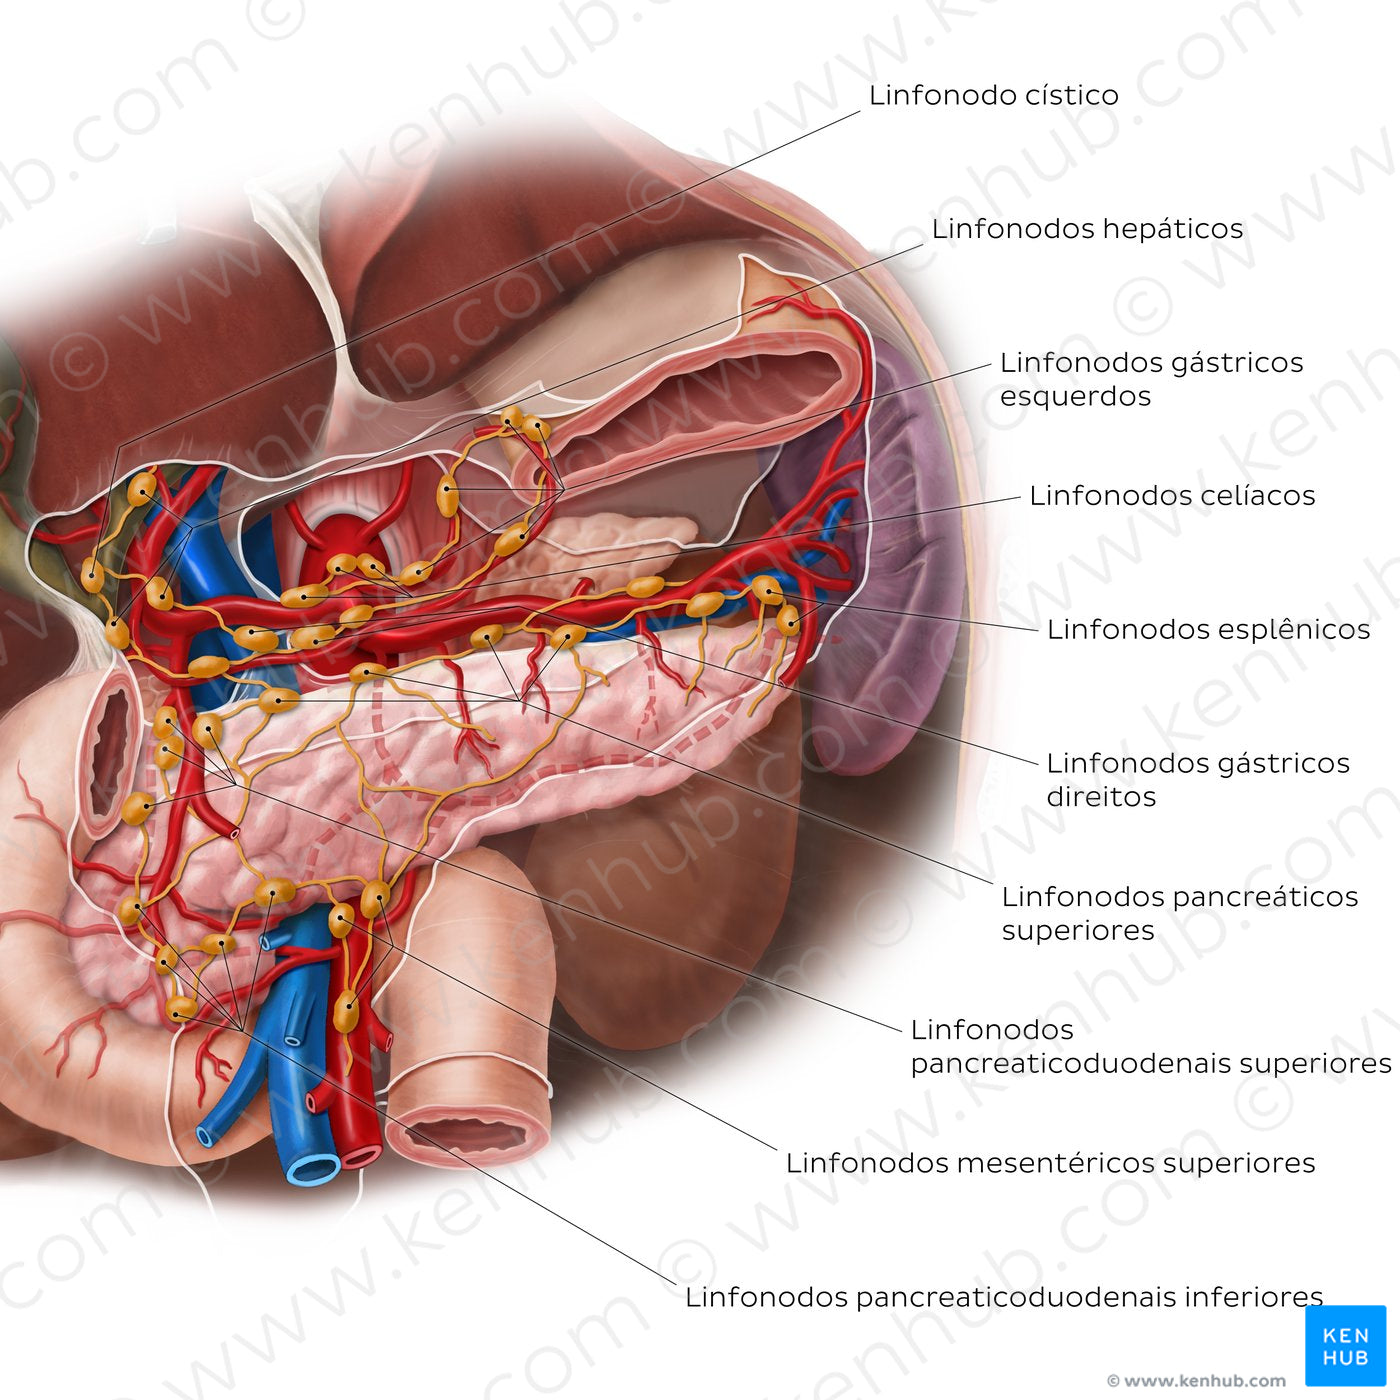 Lymphatics of the pancreas, duodenum and spleen (Portuguese)